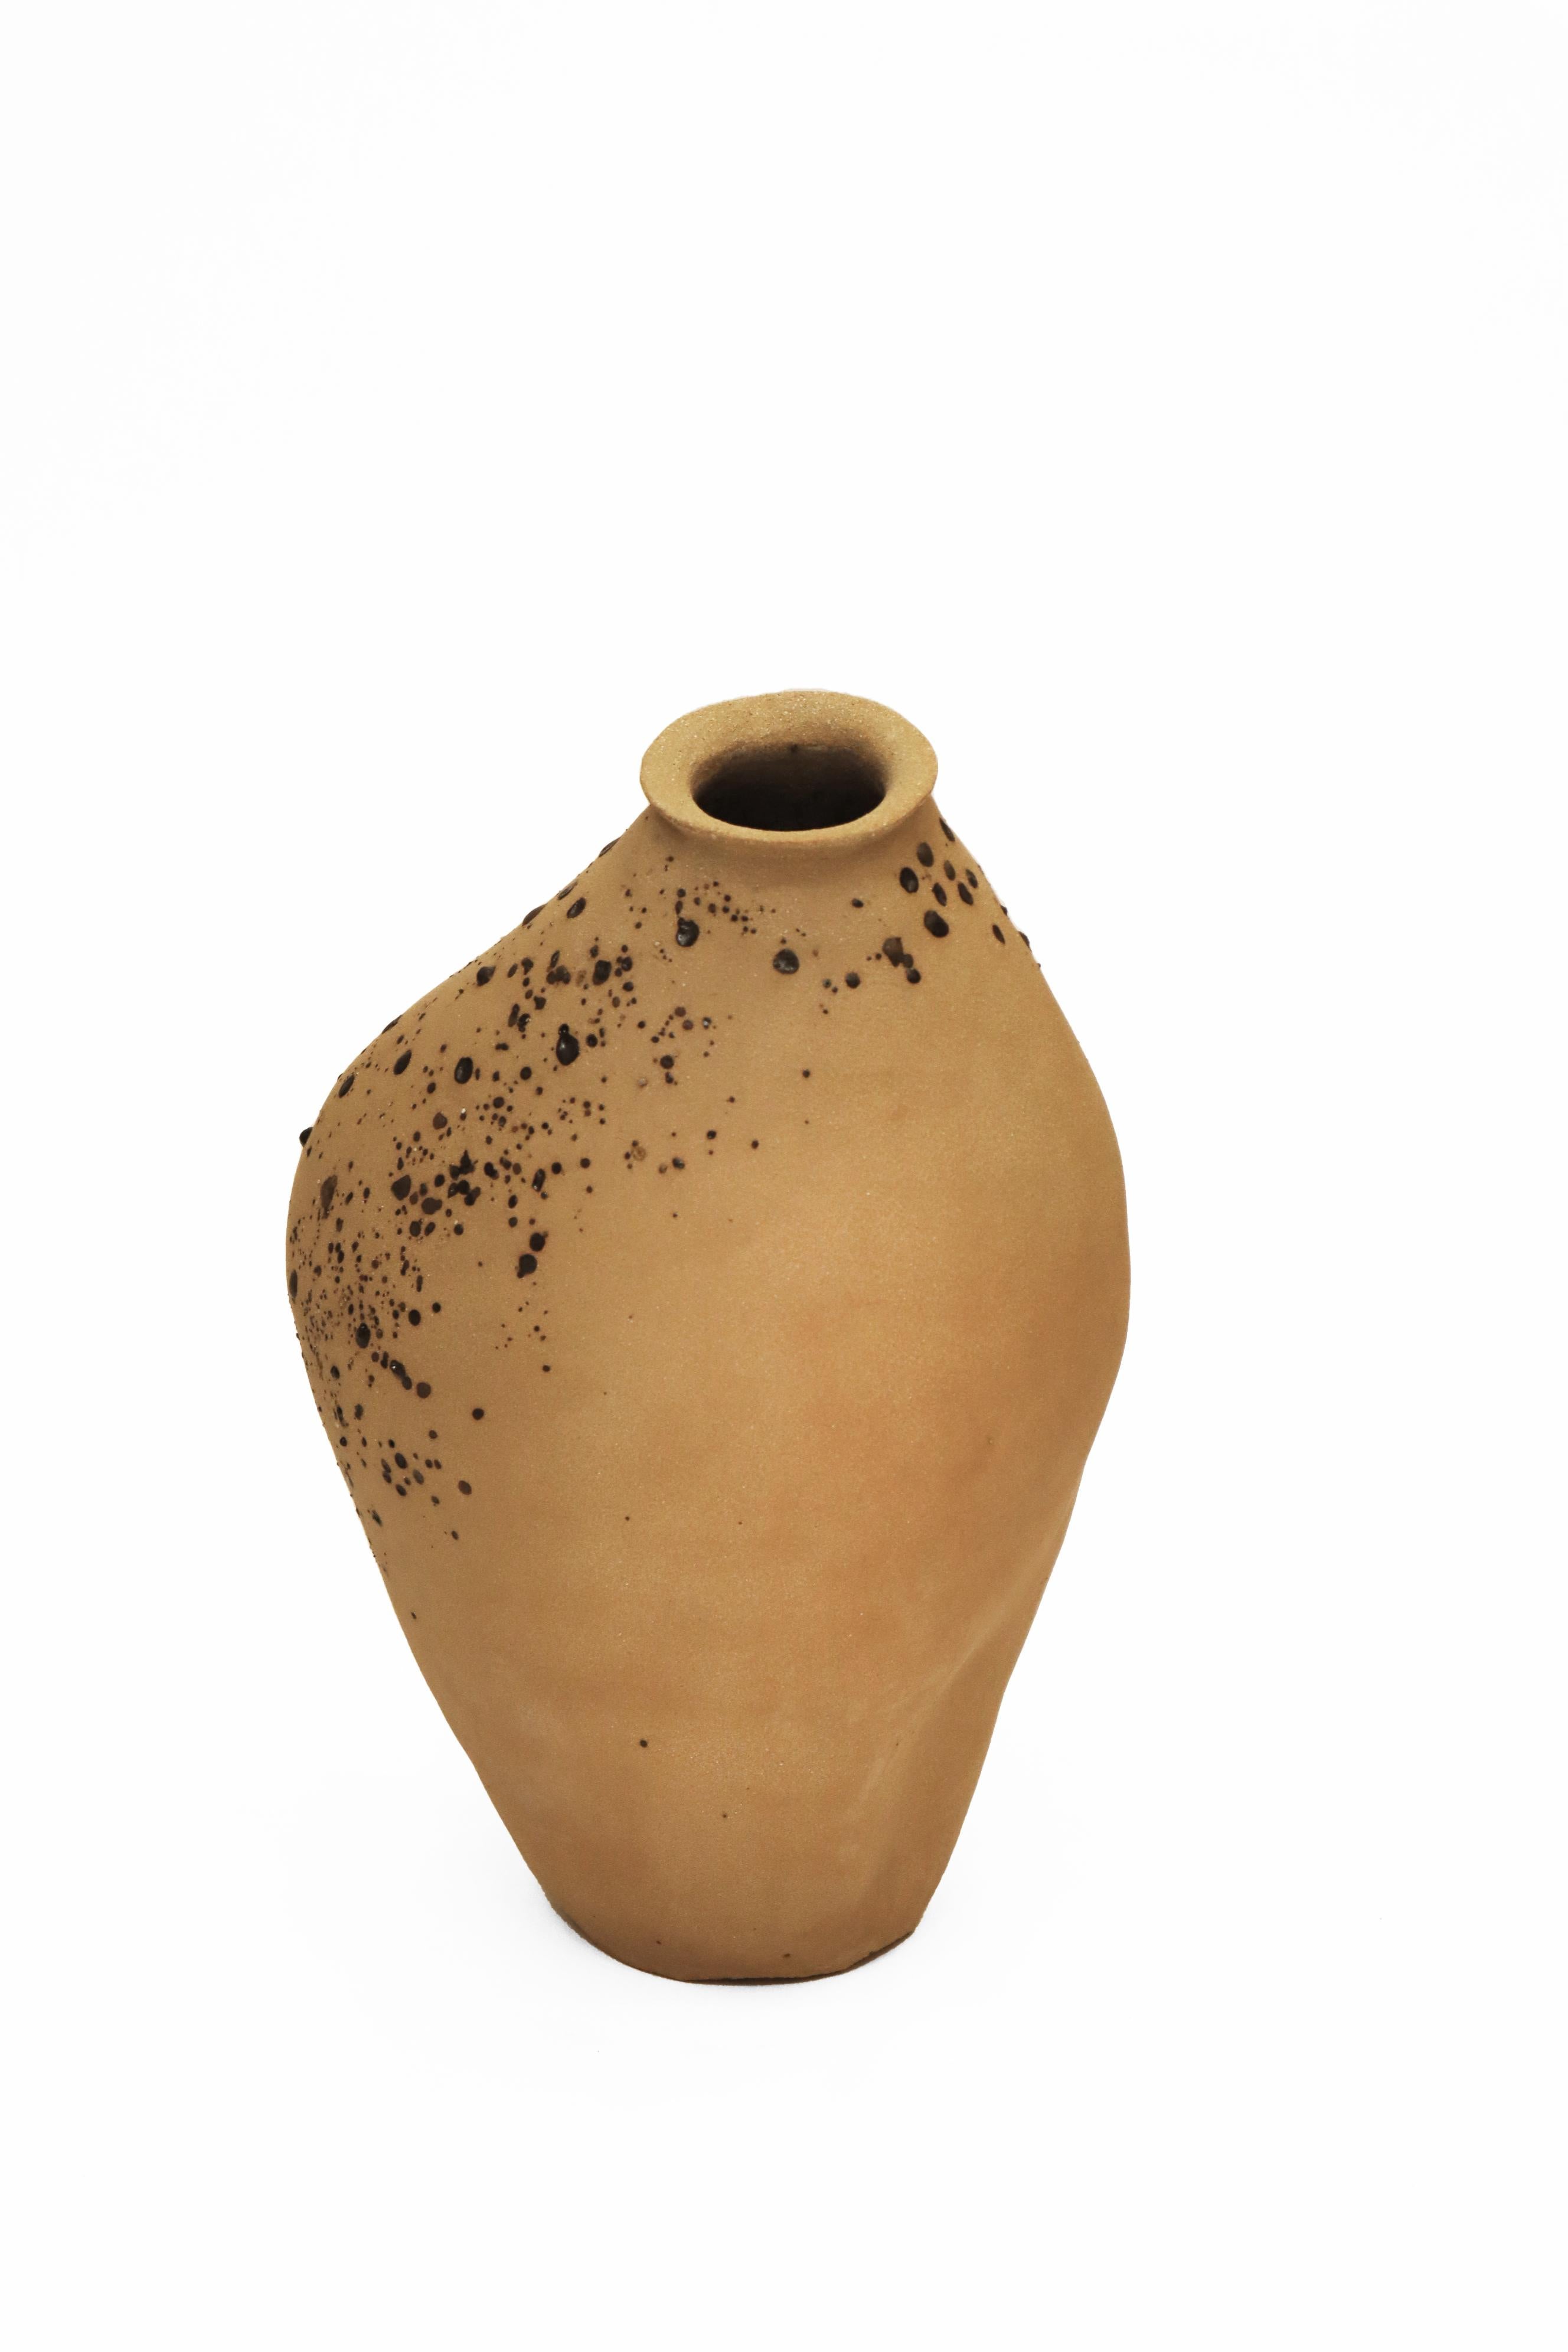 Stomata 8 Vase by Anna Karountzou
Dimensions: W 18 x D 15 x H 31.5 cm
Materials: Beige stoneware clay, clear glaze inside, decorated outside with volcano rocks collected from Santorini, fired at 1240

Born and based in Athens, Greece, with a